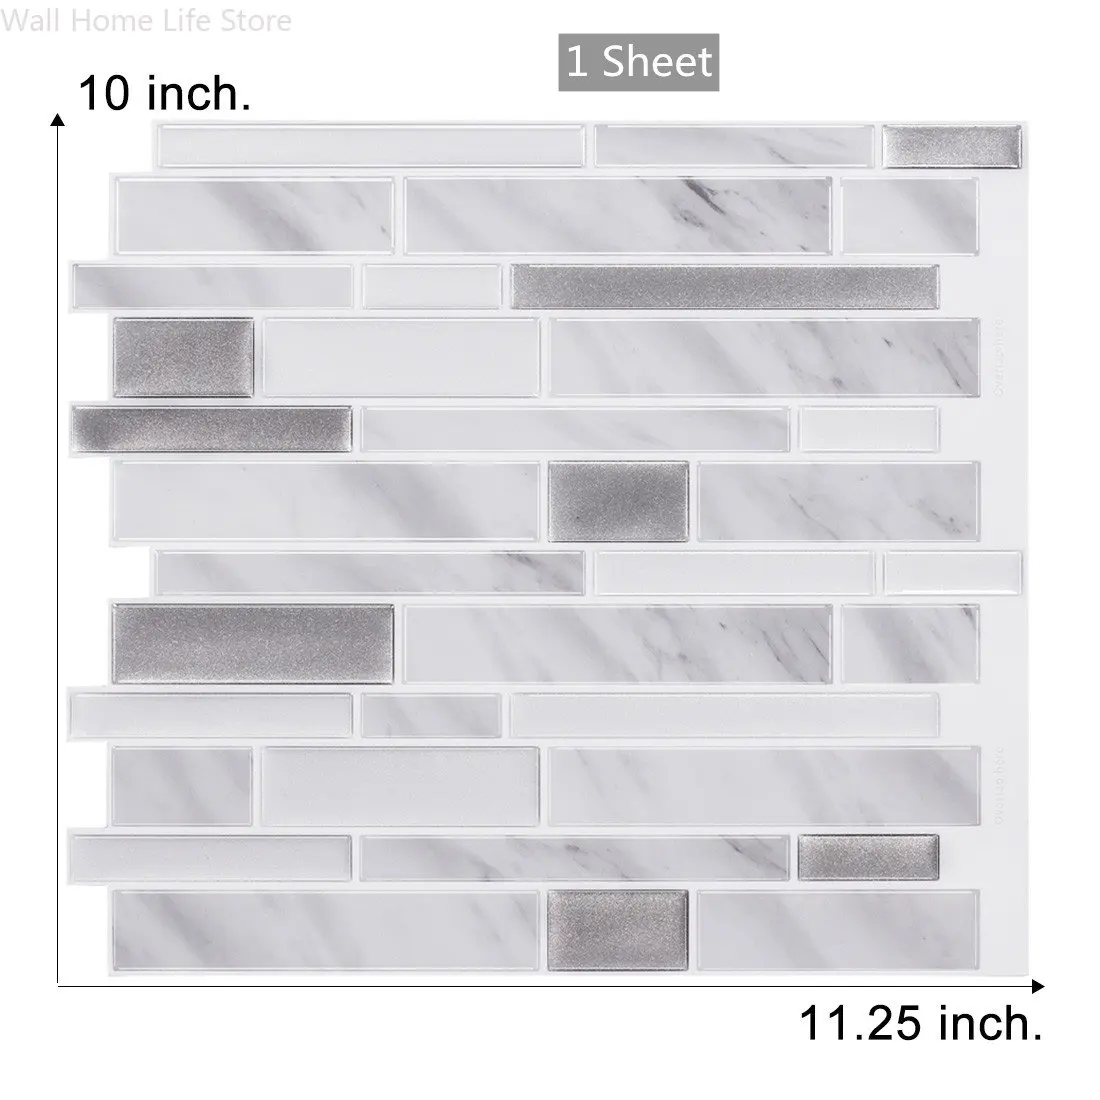 

Peel And Stick Wall Tile Mosaic Backsplash Kitchen Wallpaper Home Decoration Wtone Wall Tiles With Epacket Free Shipping